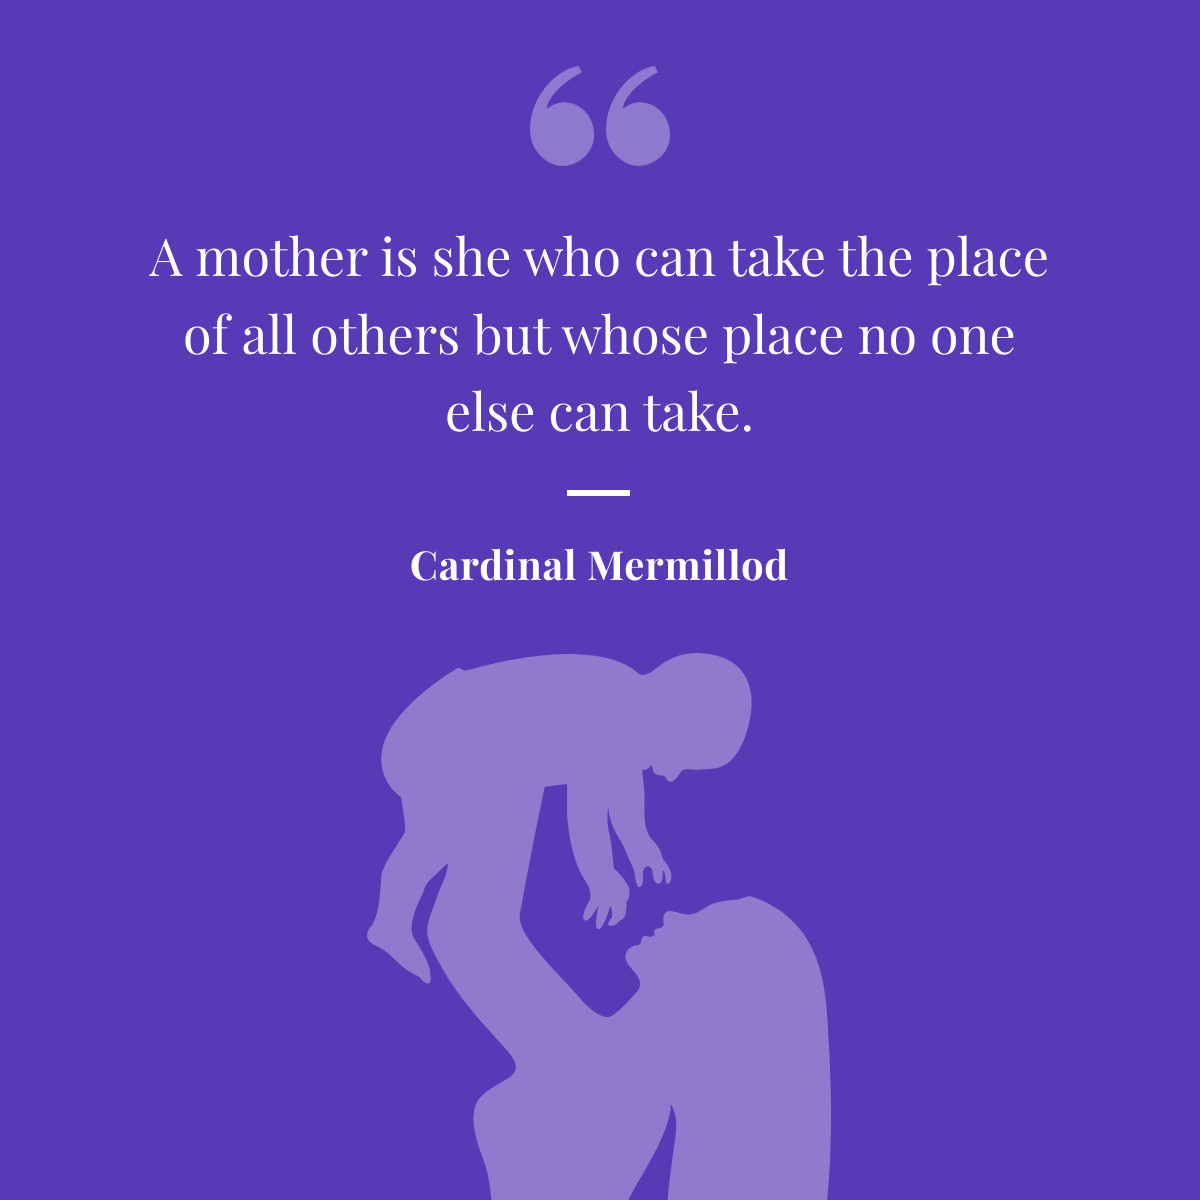 Mother's Day Cardinal Mermillod Quote Responsive Square Art 1200x1200